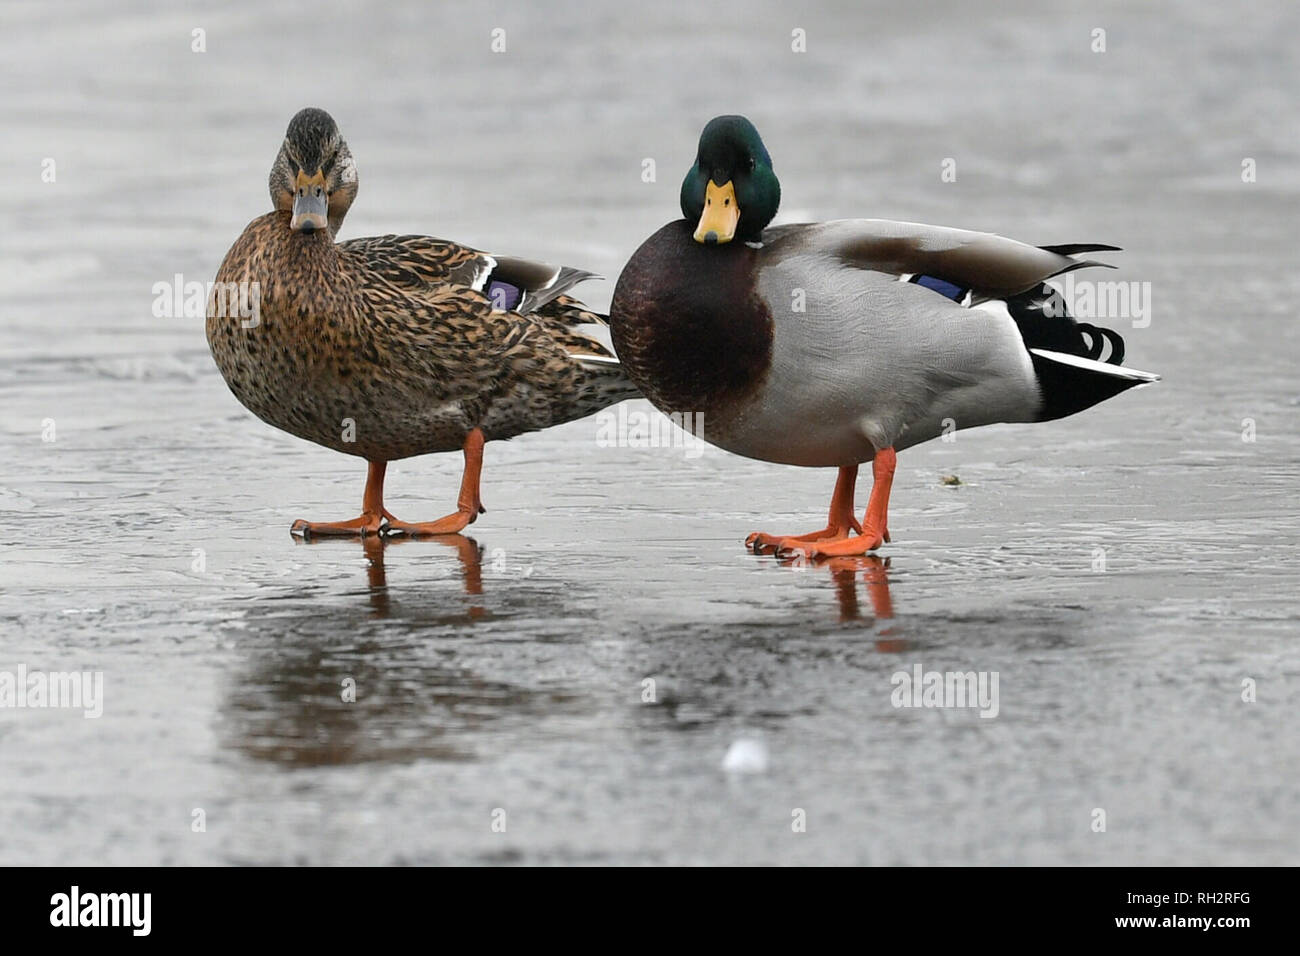 Ducks on a frozen near Merthyr Tydfil in Wales, after the UK had its coldest night of the winter so far as the cold snap continues to cause icy conditions across the country. Stock Photo